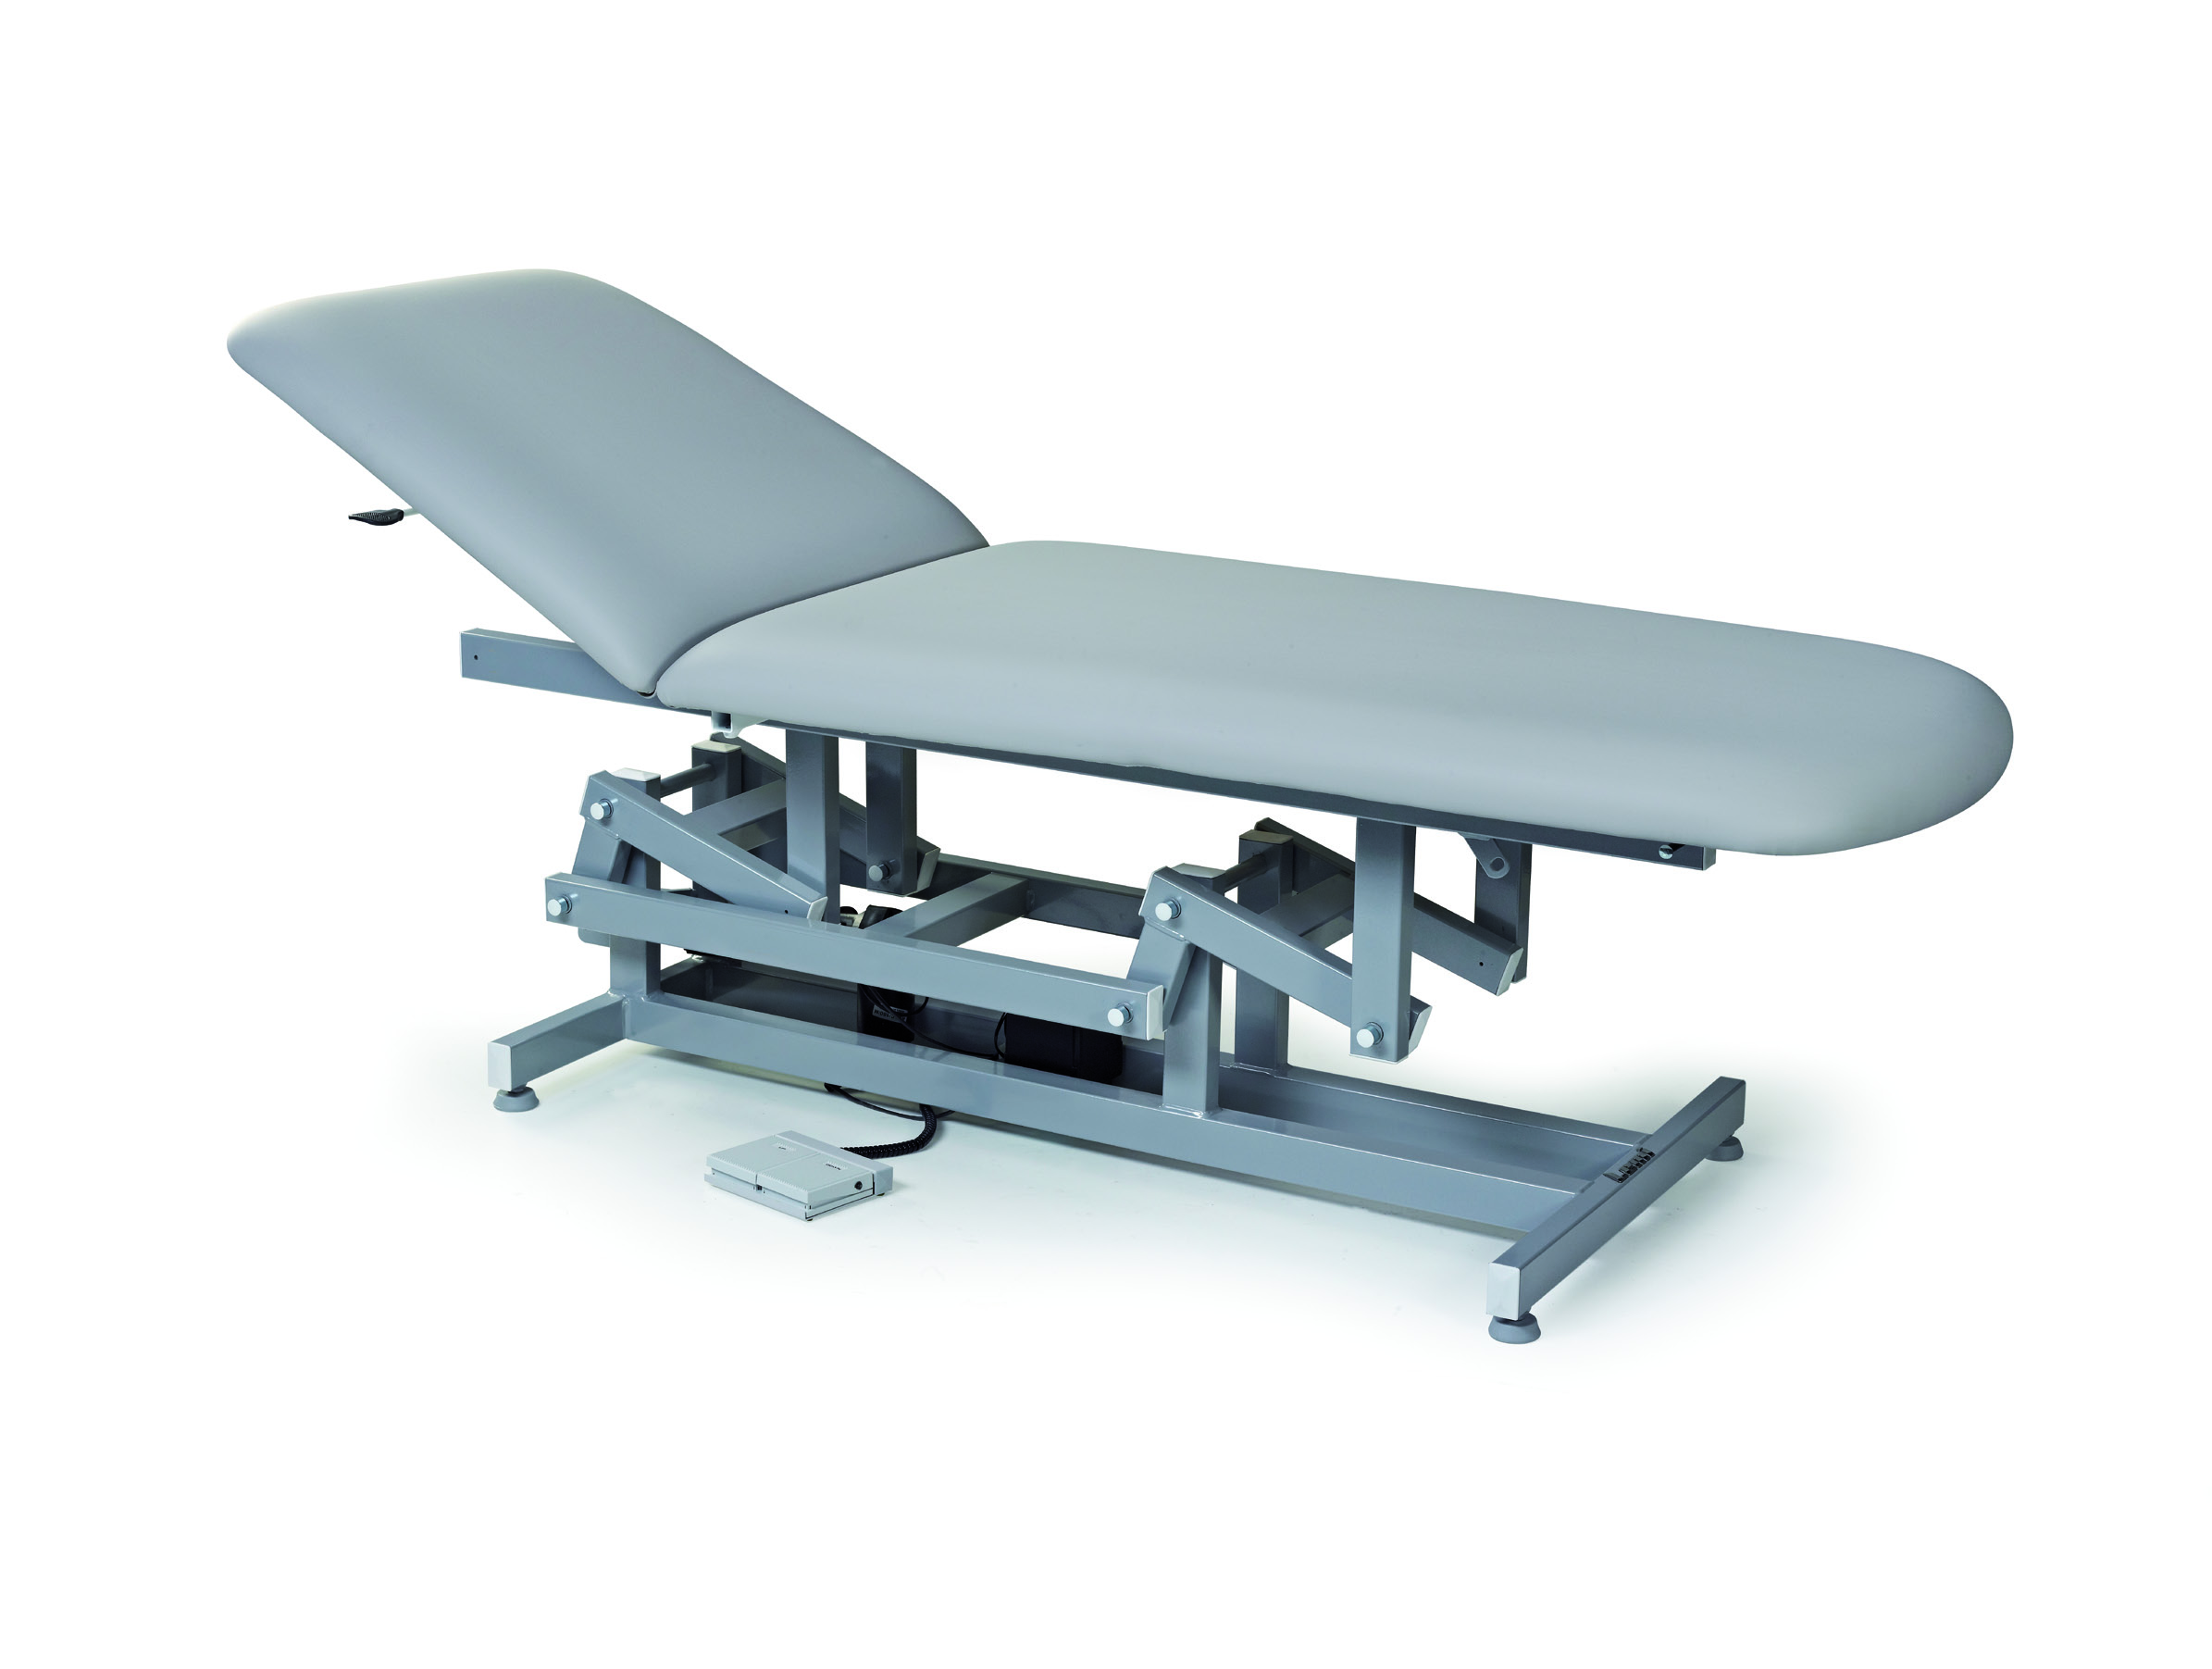 M e d i c a l L i n e SoMed Patient-made A misura di paziente Multifunctional bed for